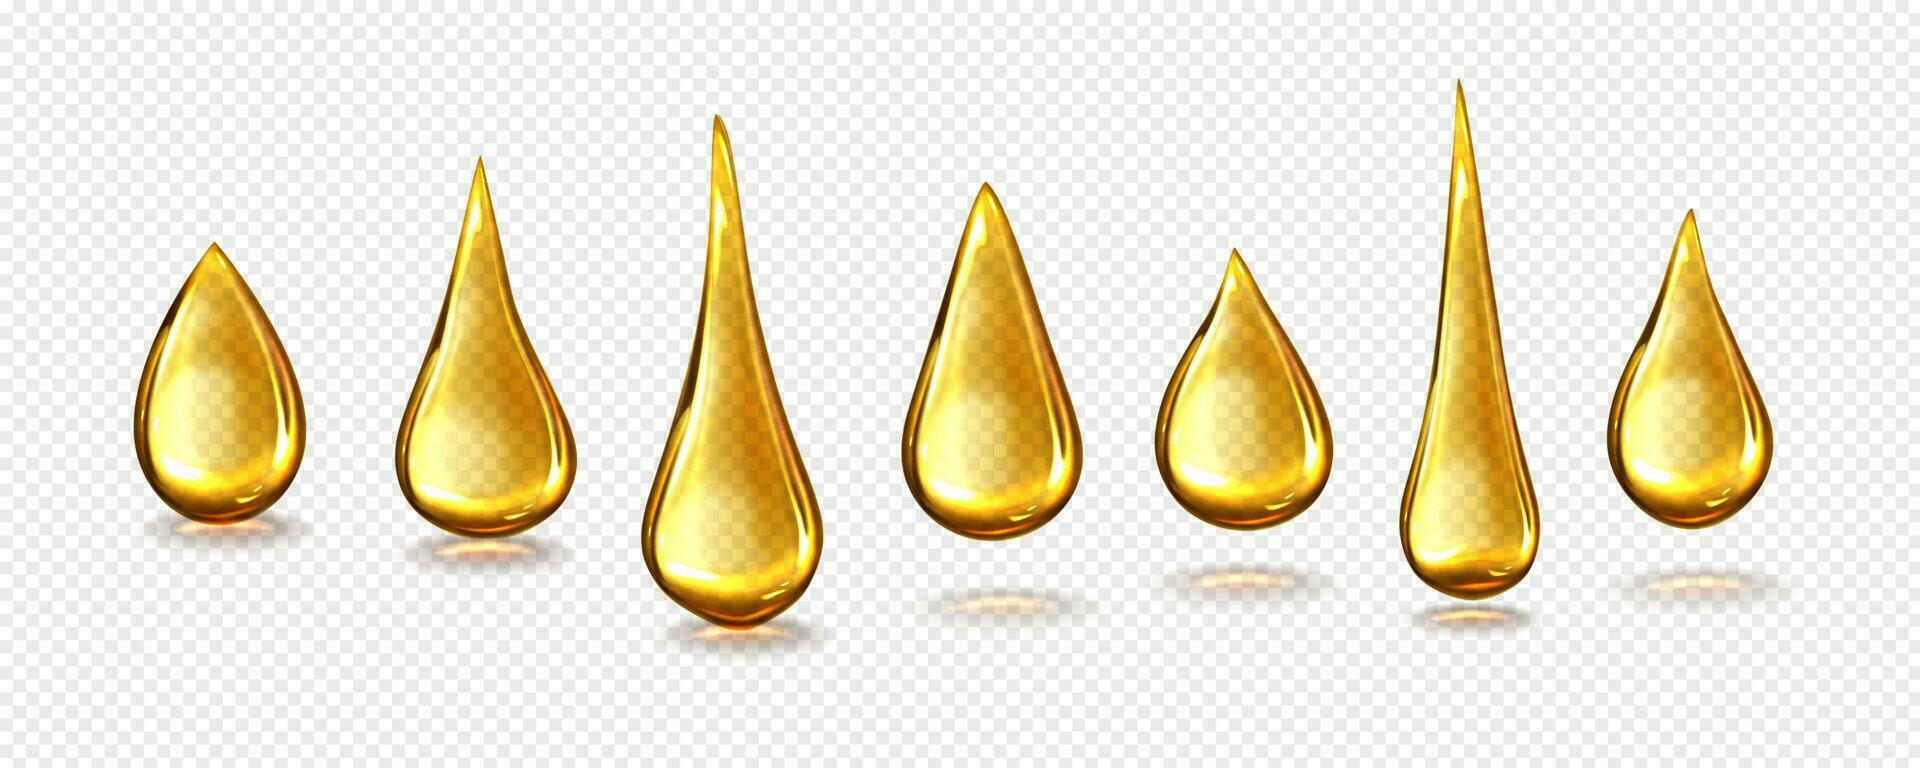 Gold honey drop, isolated olive oil droplet vector